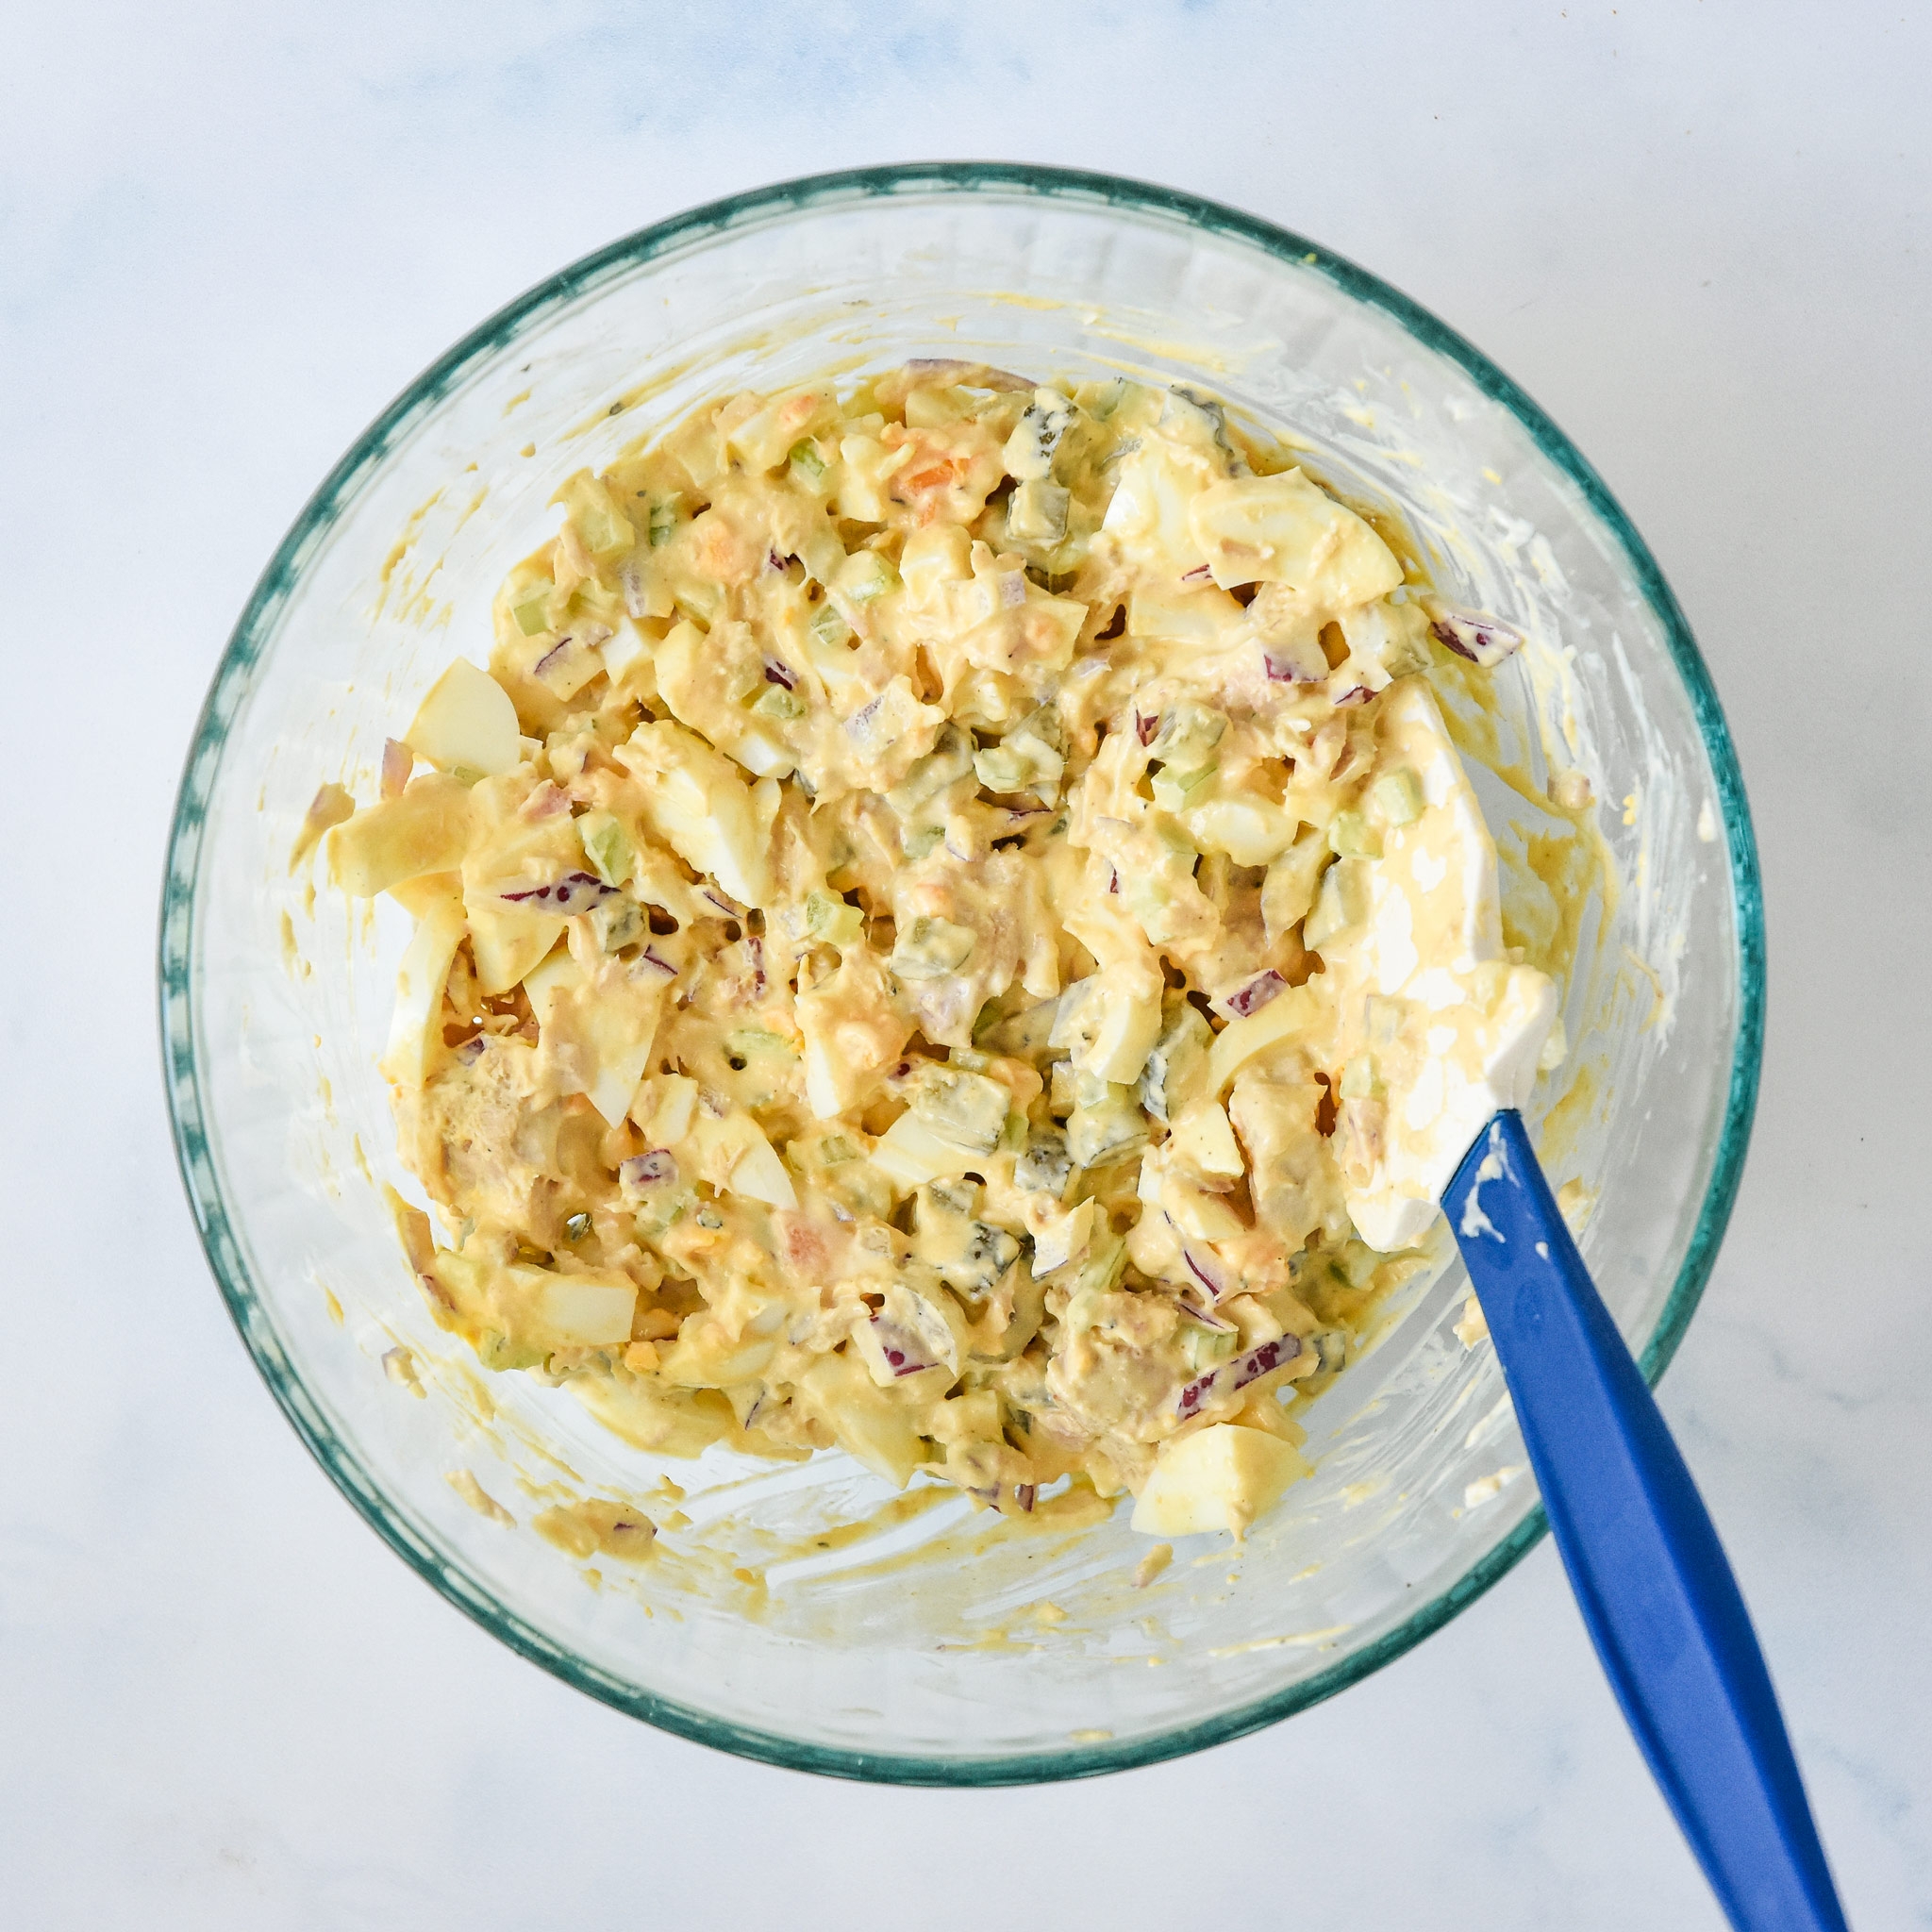 mixed up tuna egg salad in a large glass bowl.